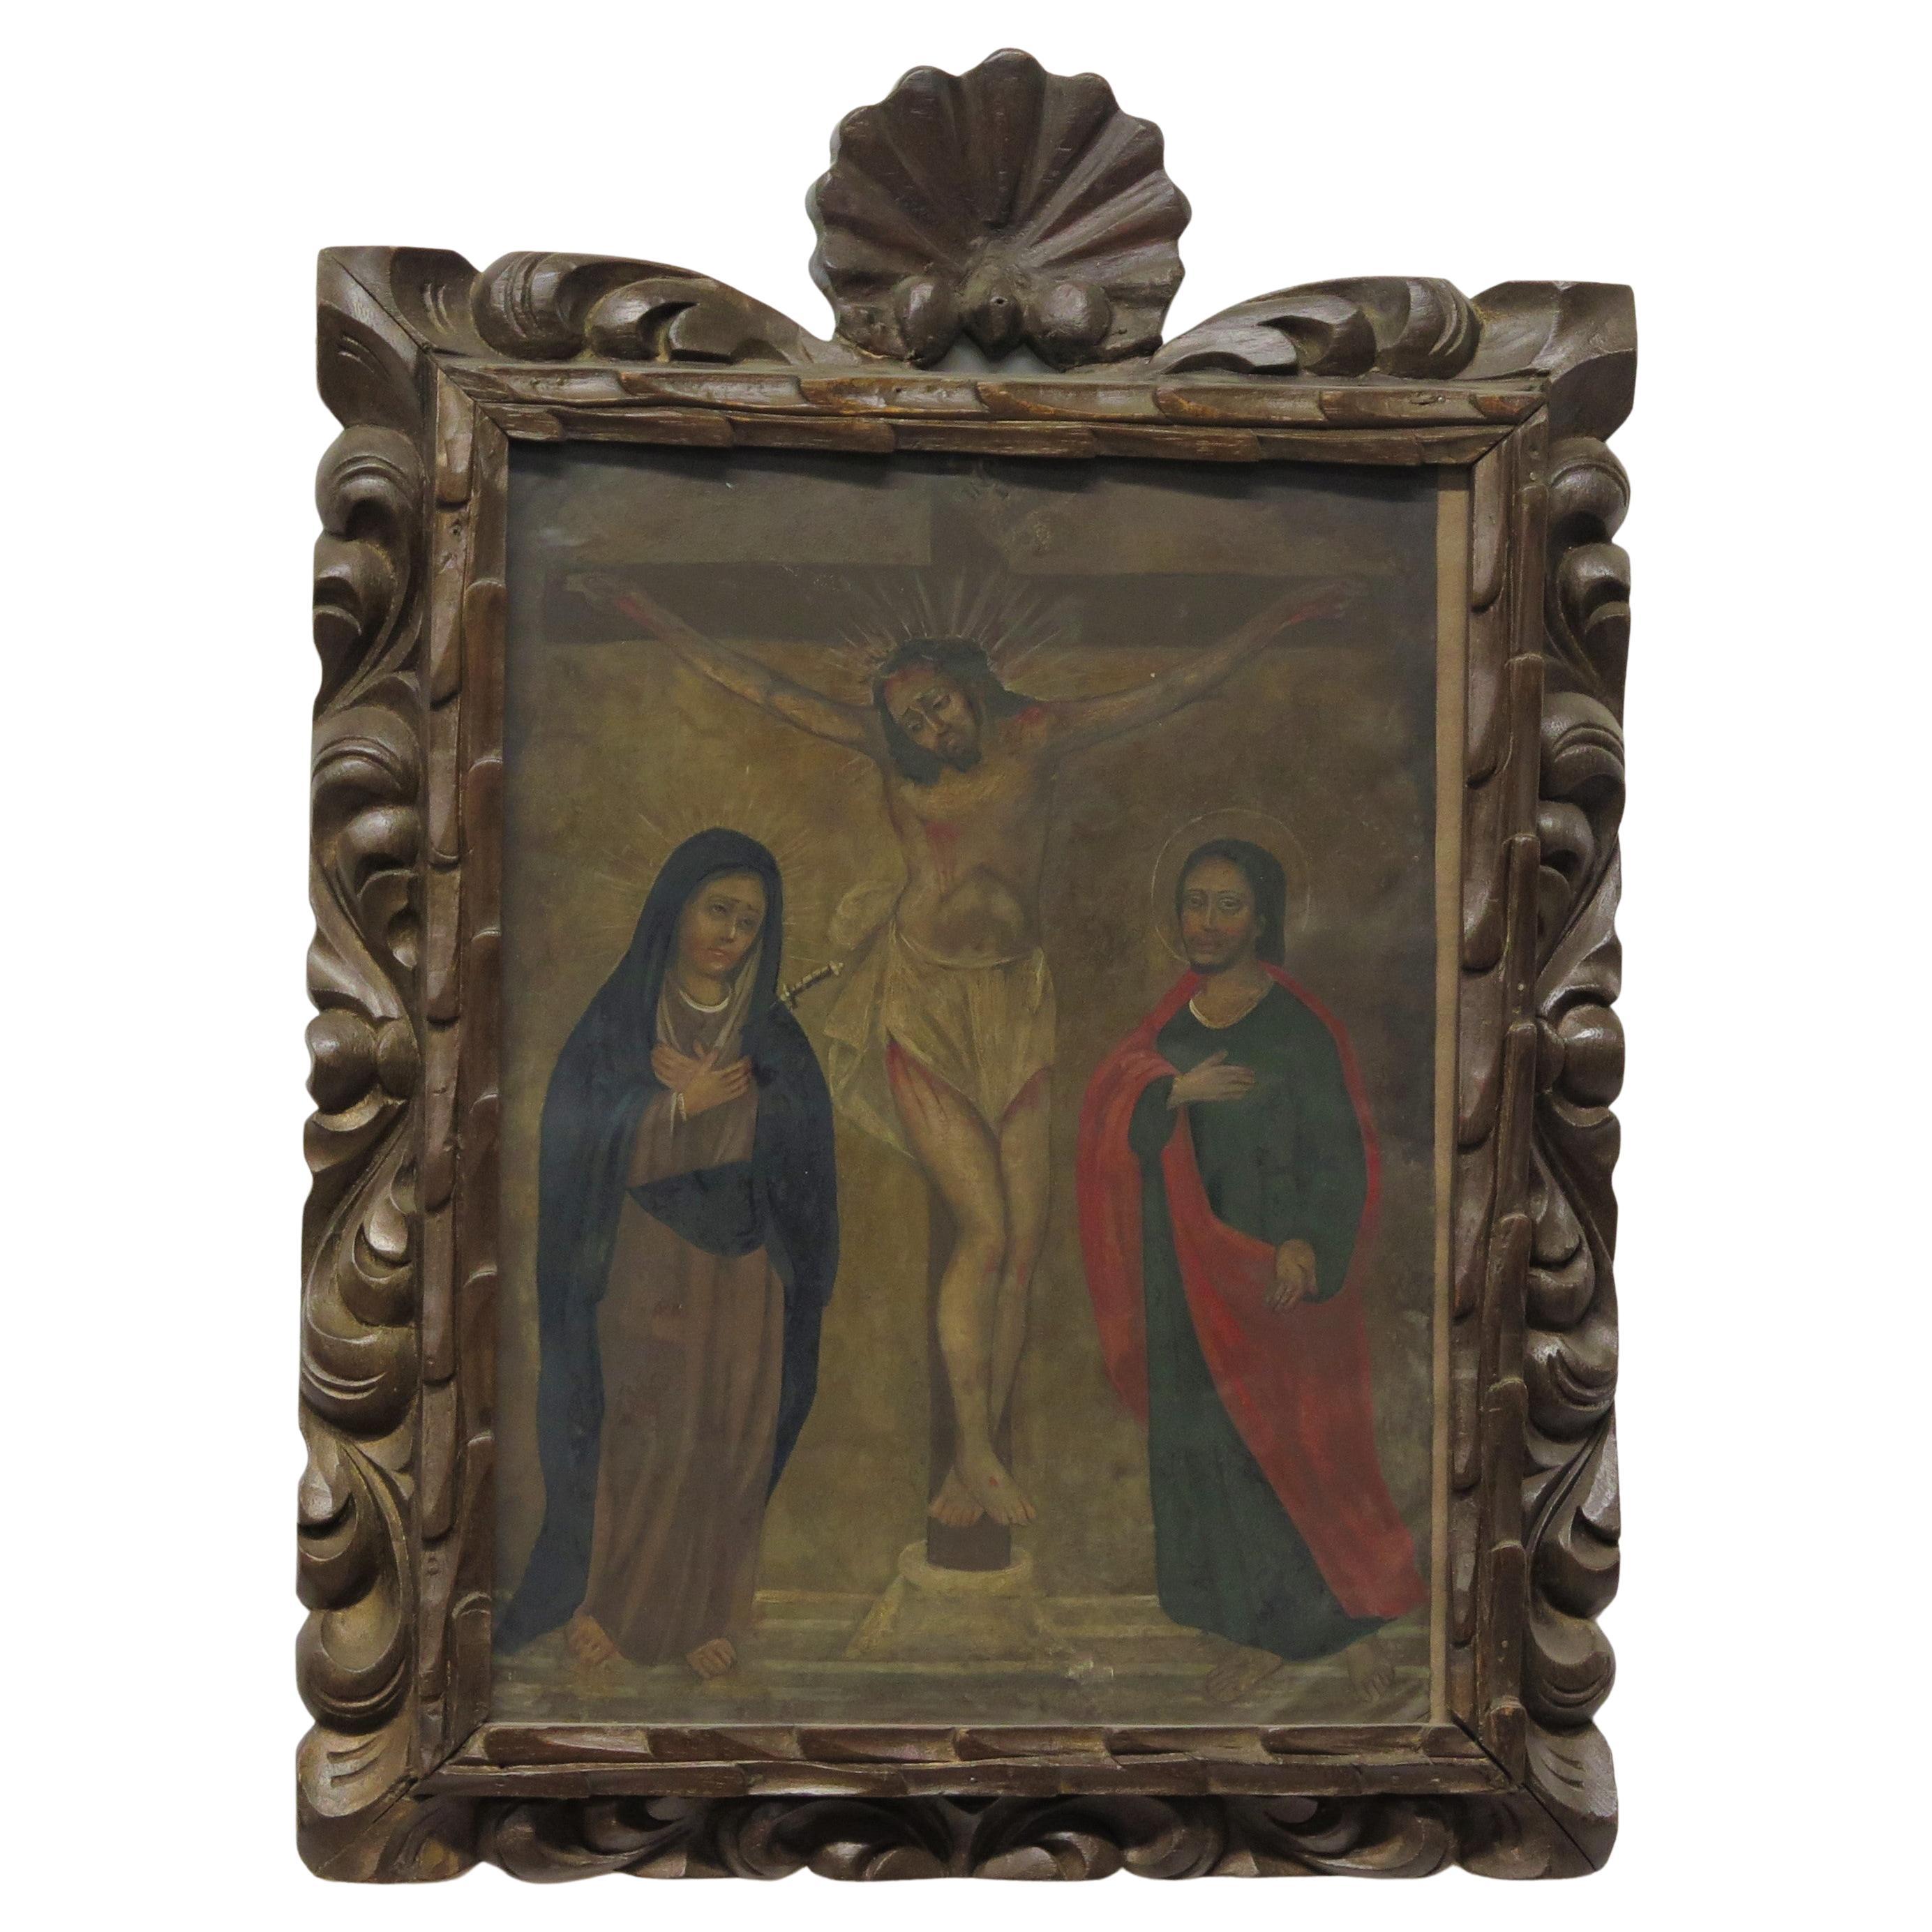 Spanish Colonial Retablo "The Crucifixion" with the Virgin Mary and Saint John For Sale